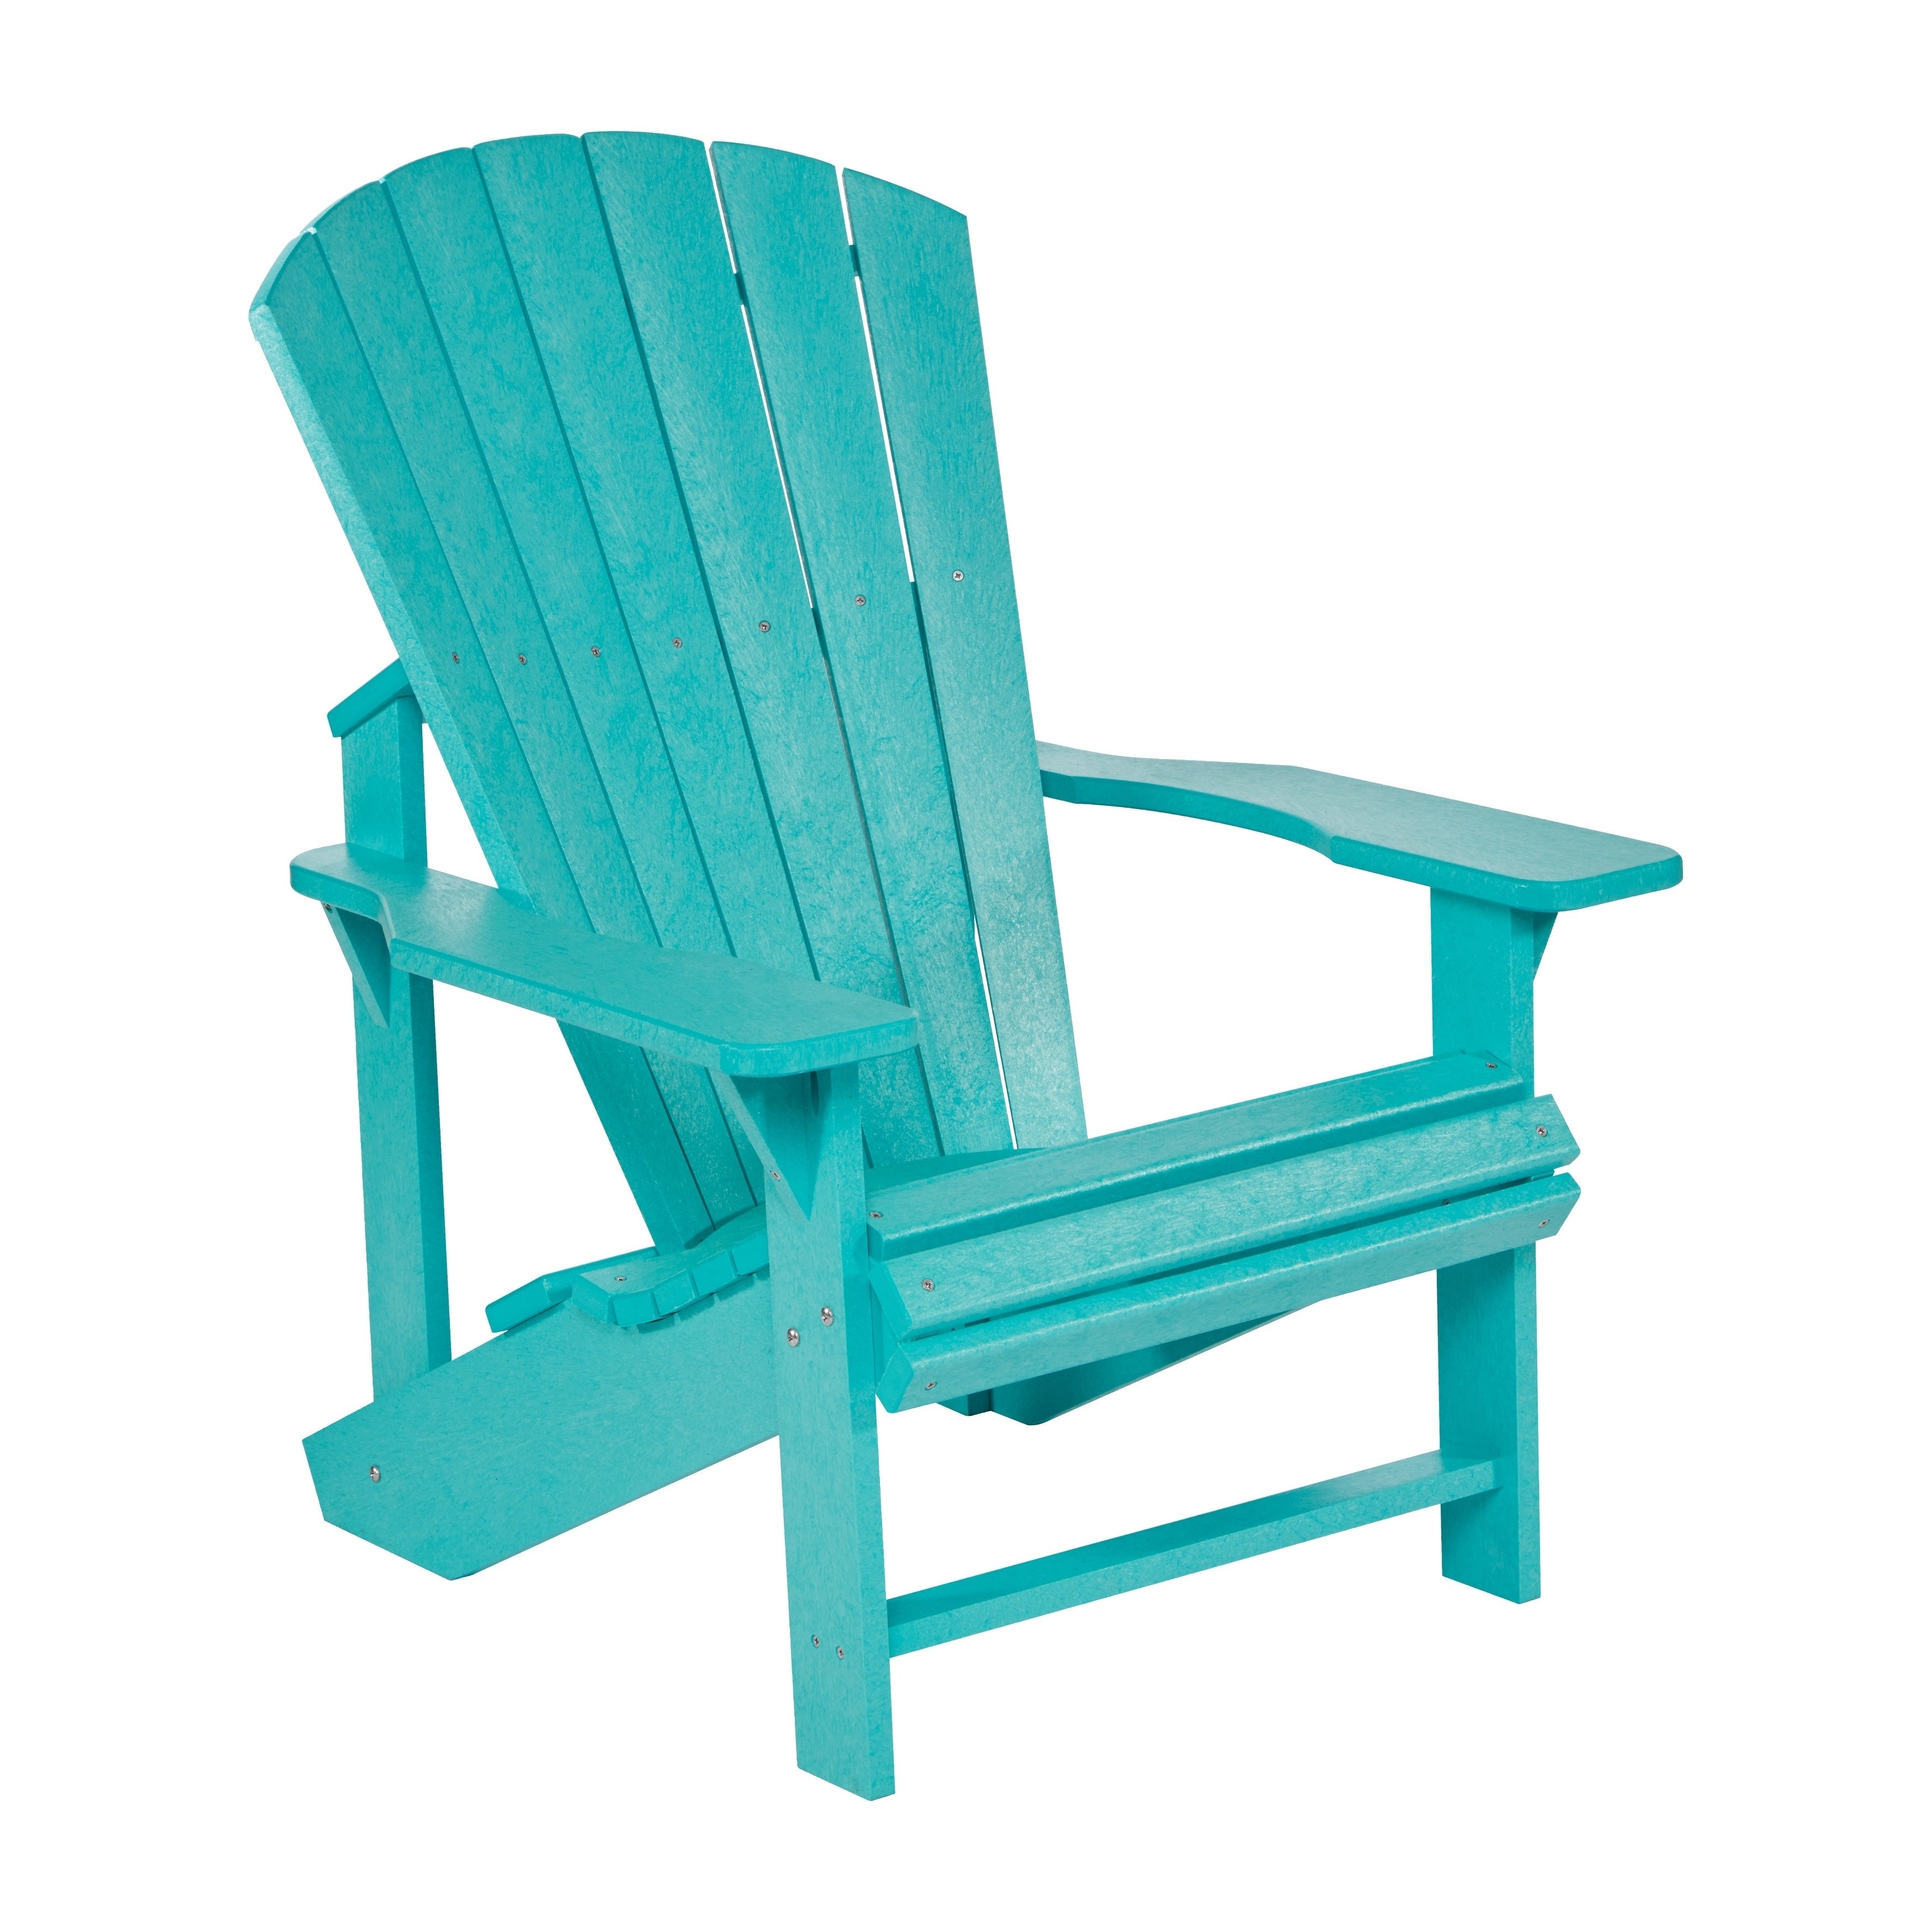 Crp Products Benefits Of Using Recycled Plastic Adirondack Chairs